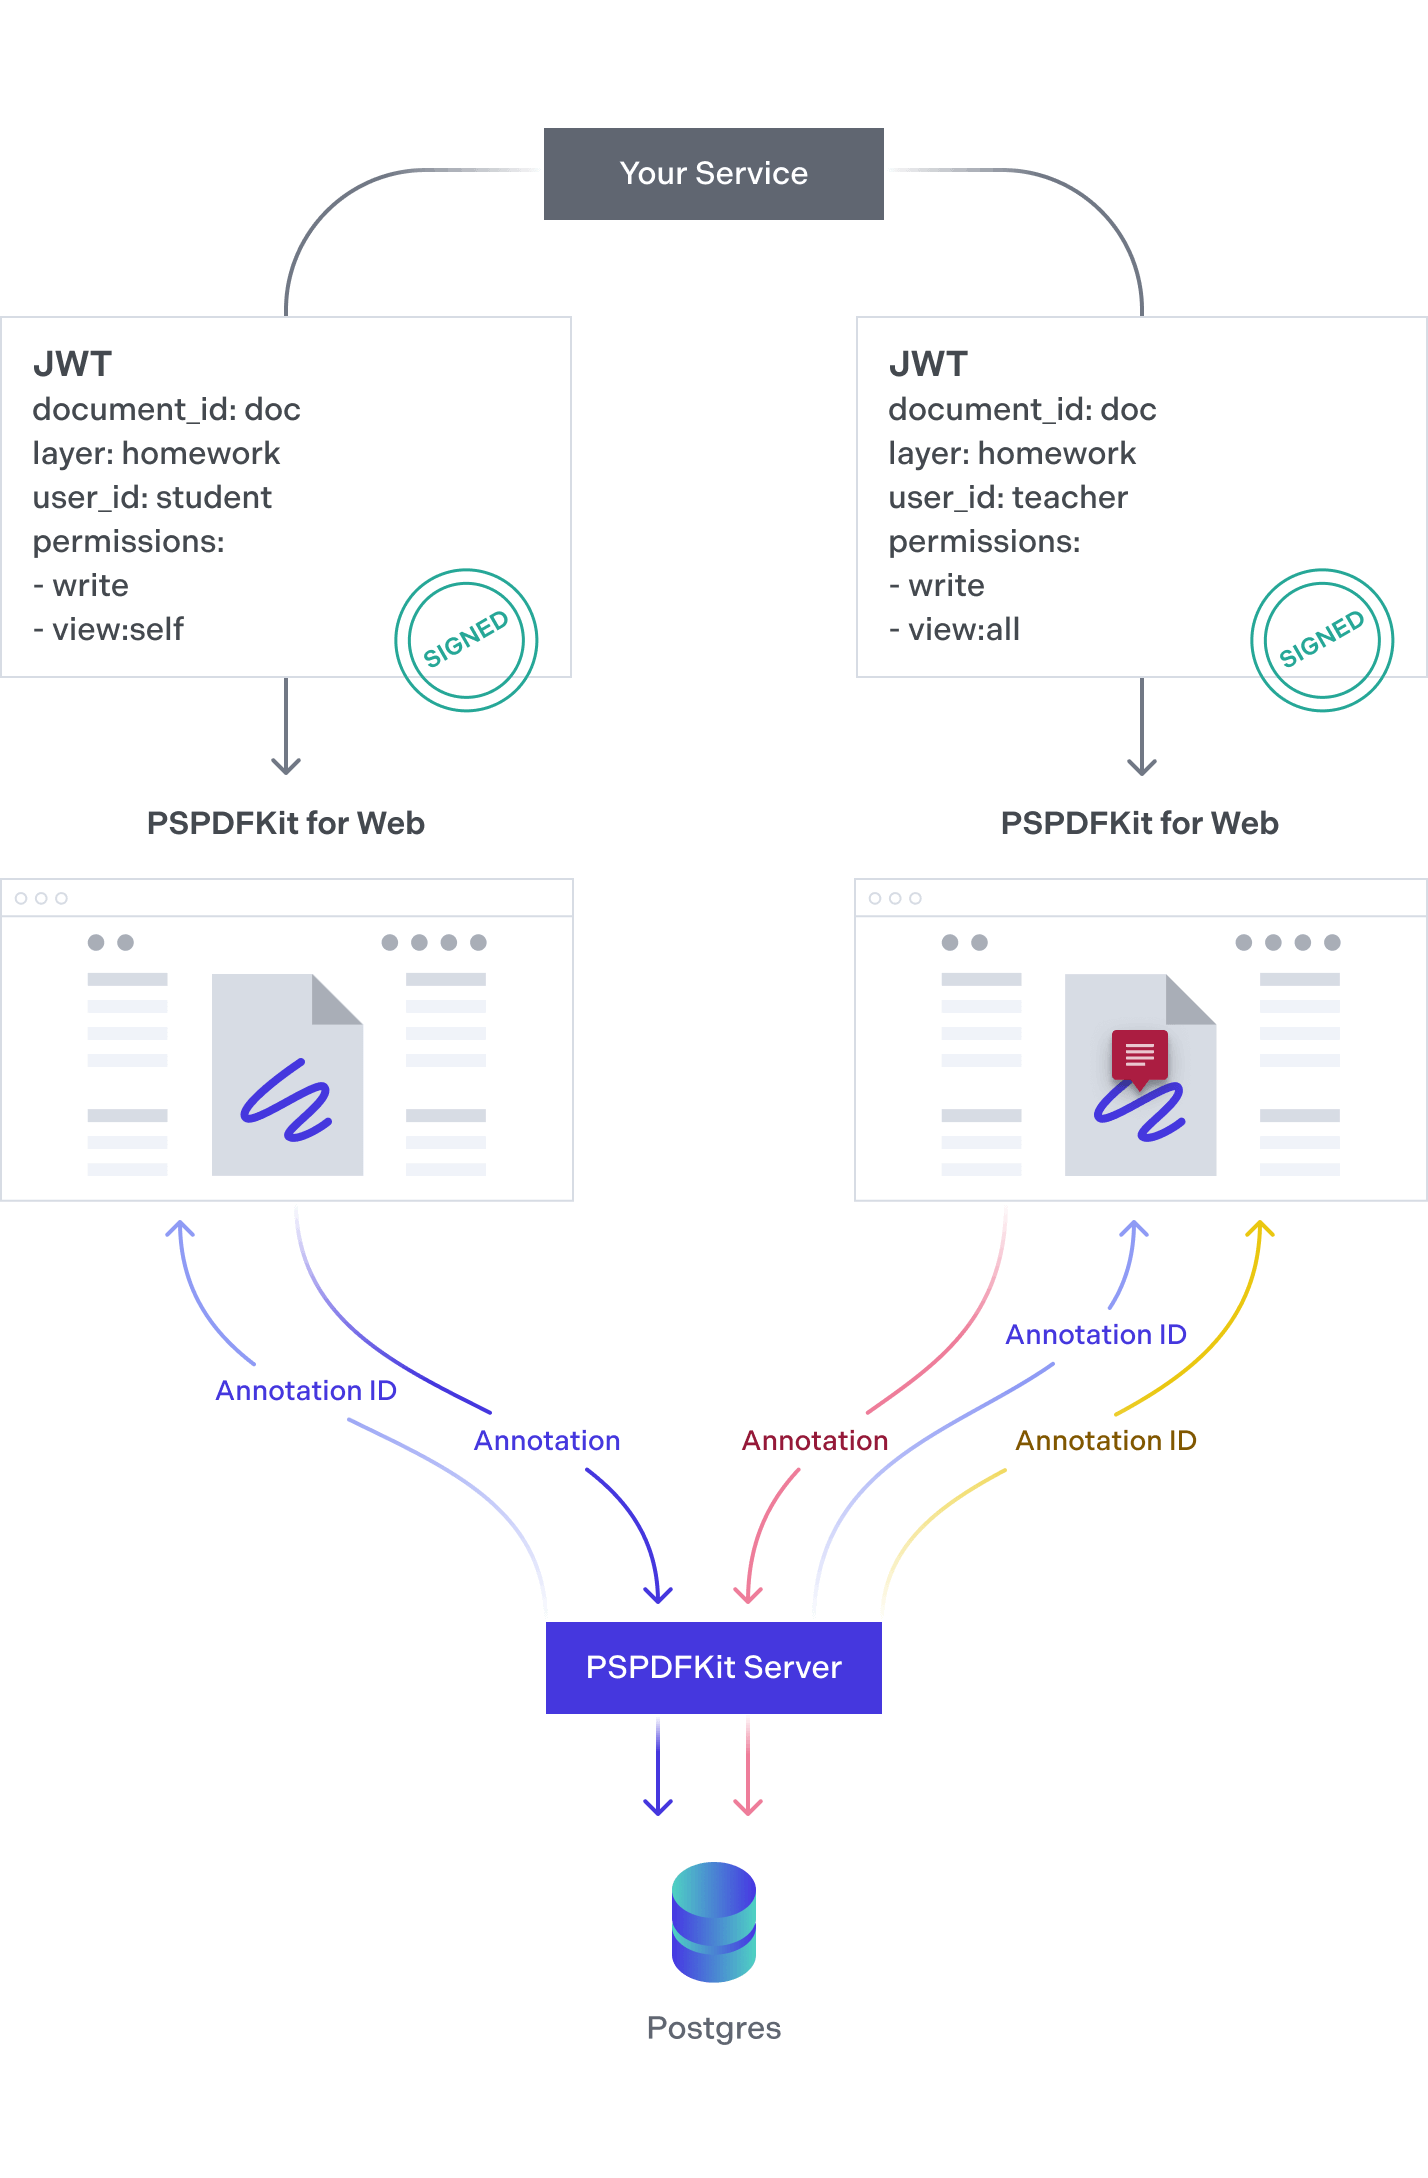 You declare different layer names in the JWT used for authentication to create different perspectives of the same document.